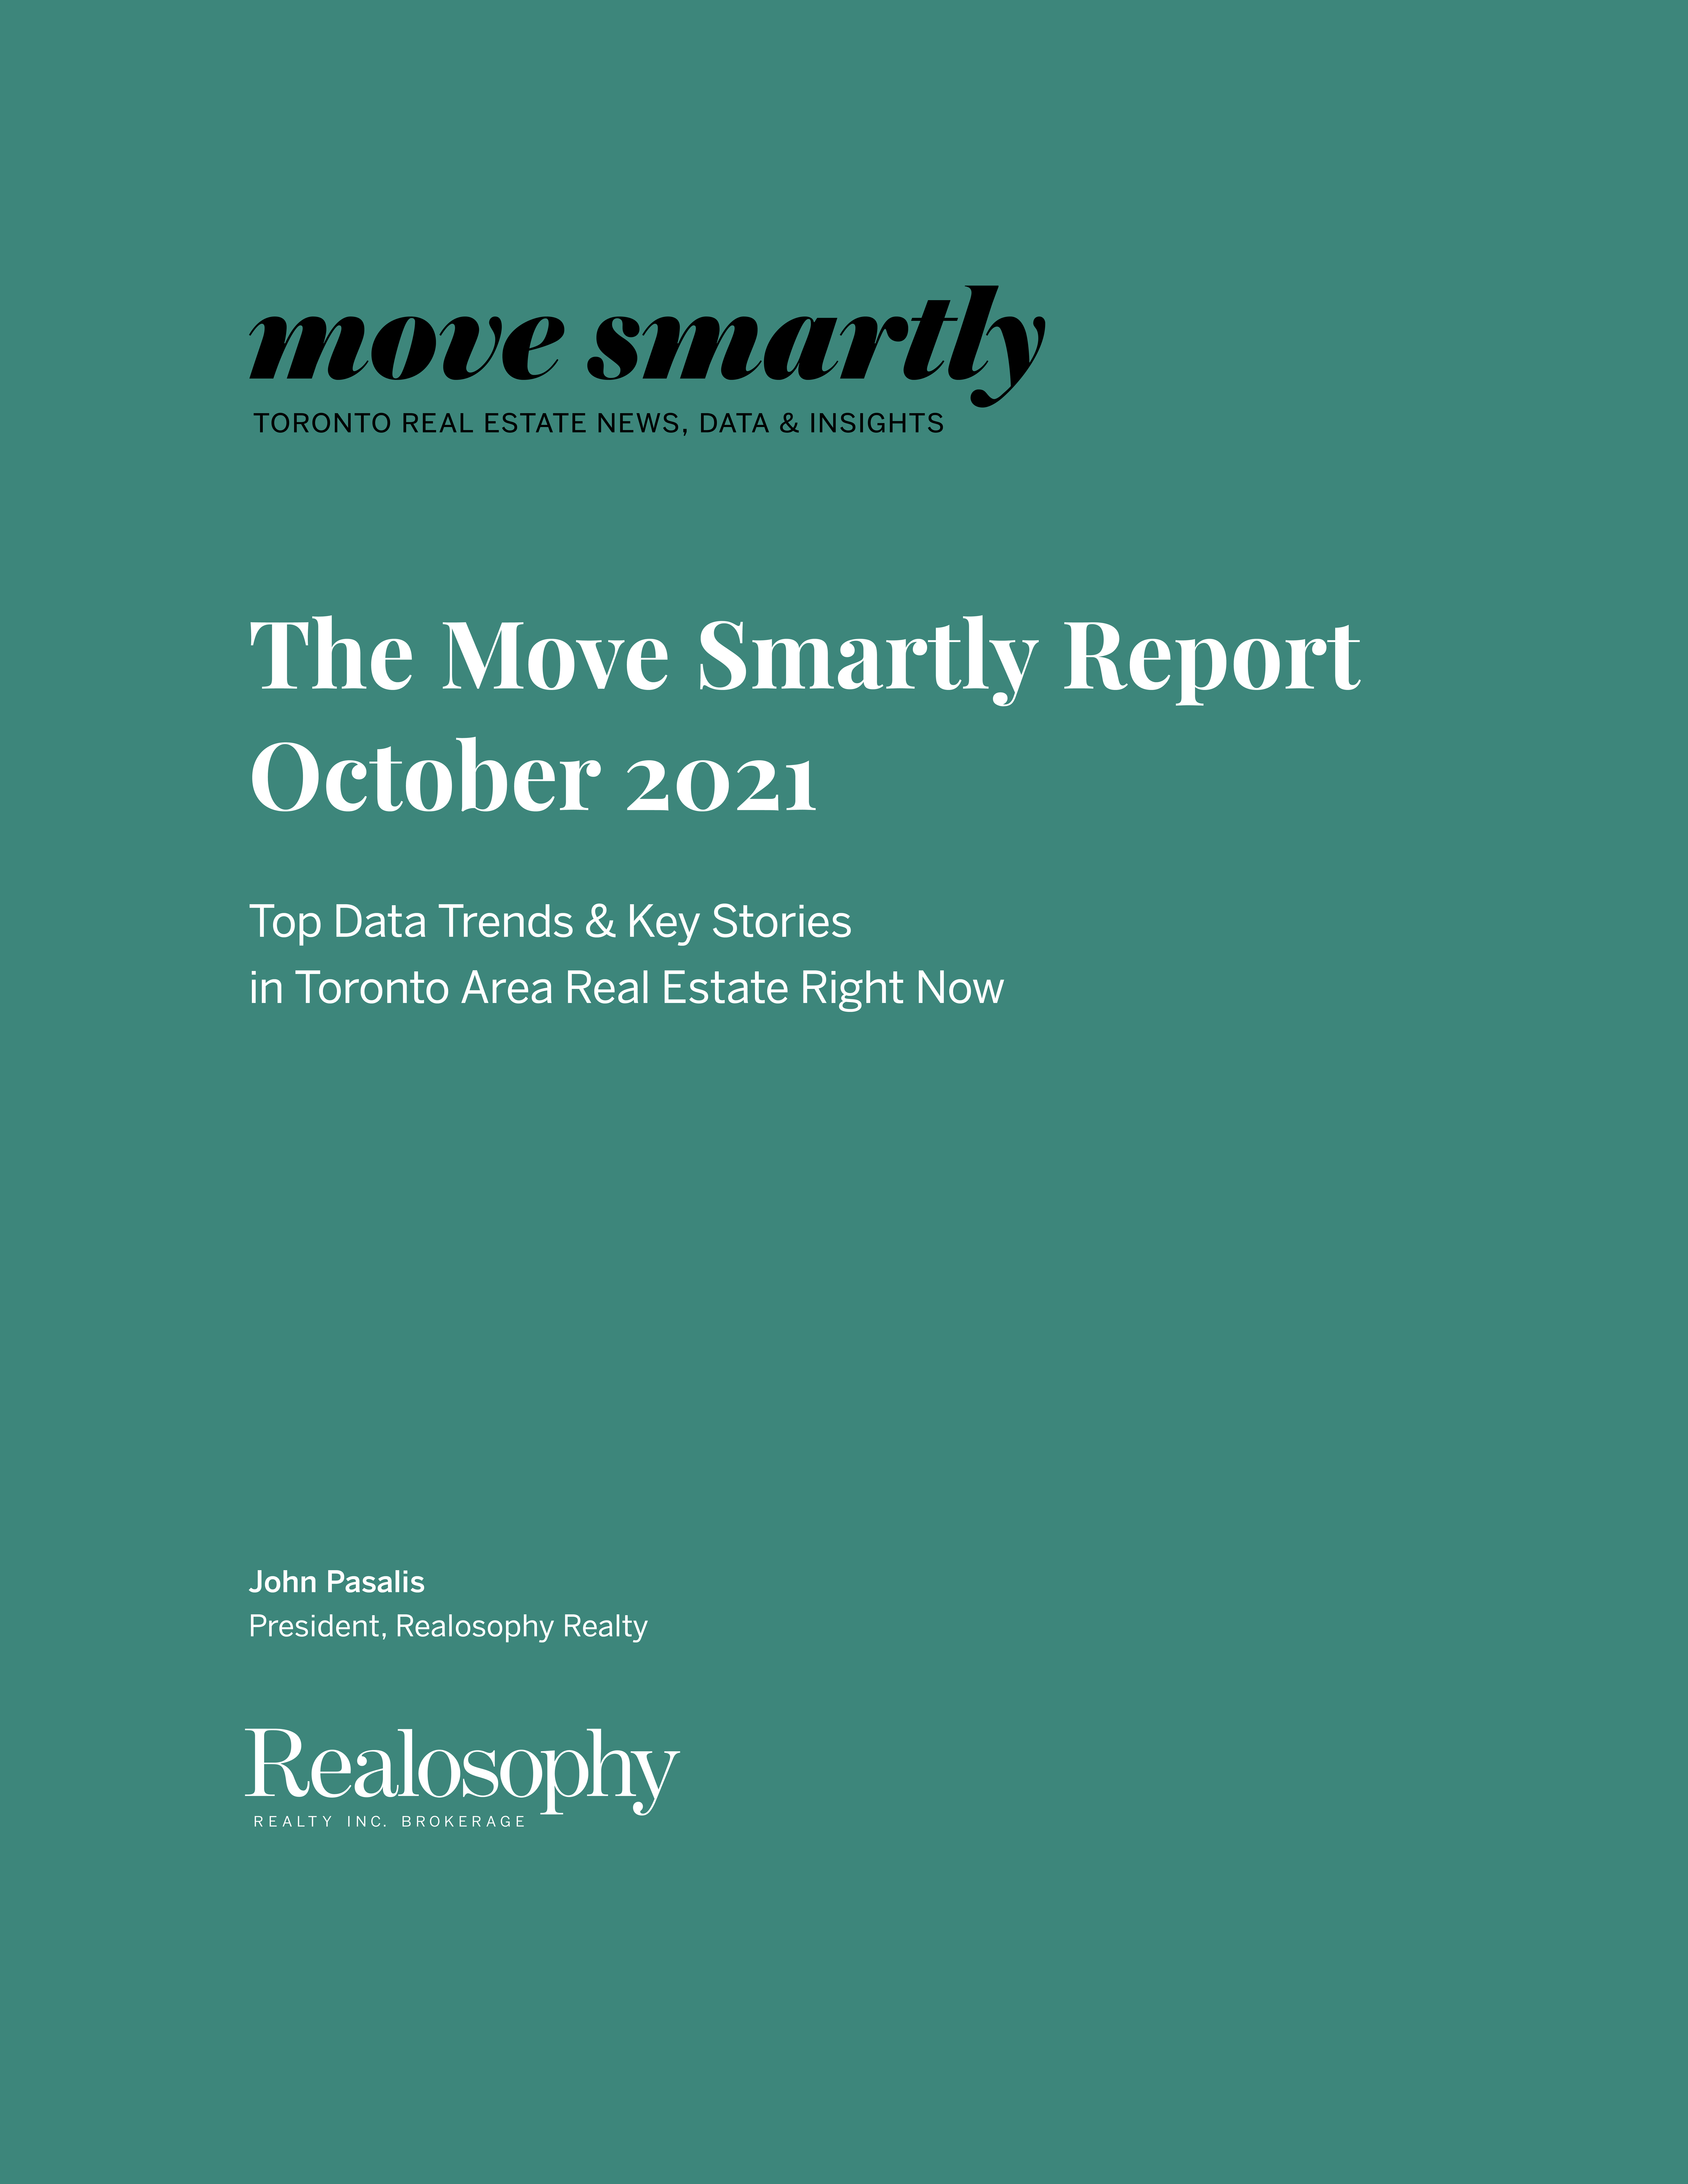 October 2021 Move Smartly Report